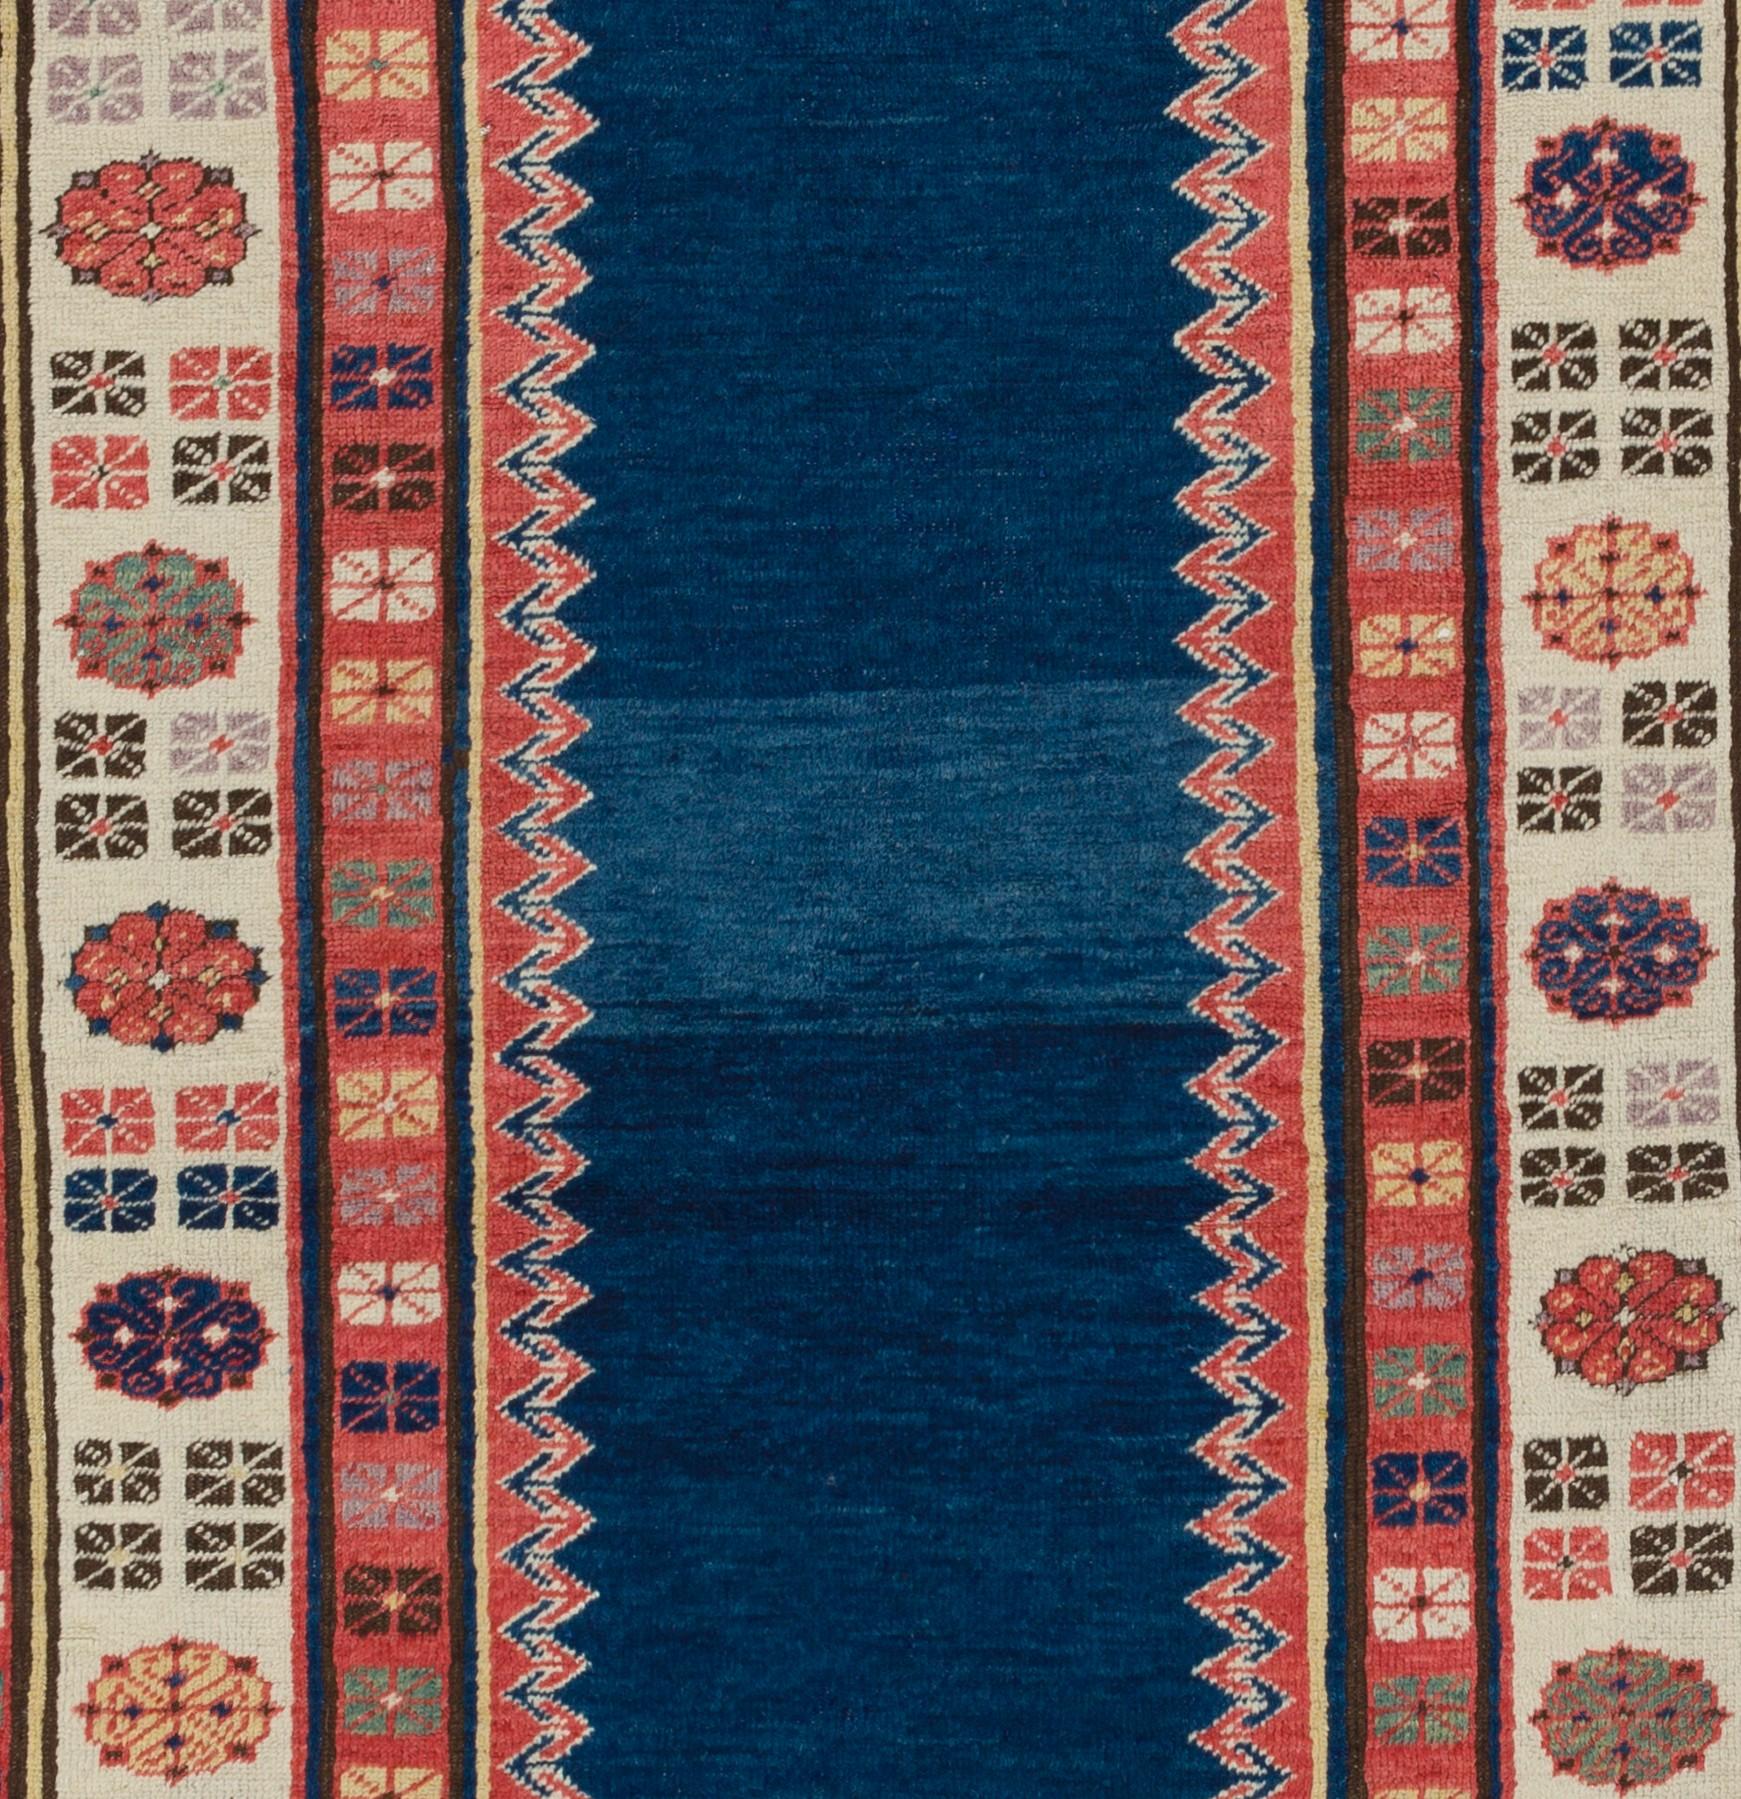 Kazak Vintage Hand-Knotted Caucasian Talish Rug, 100% Wool and Natural Dyes